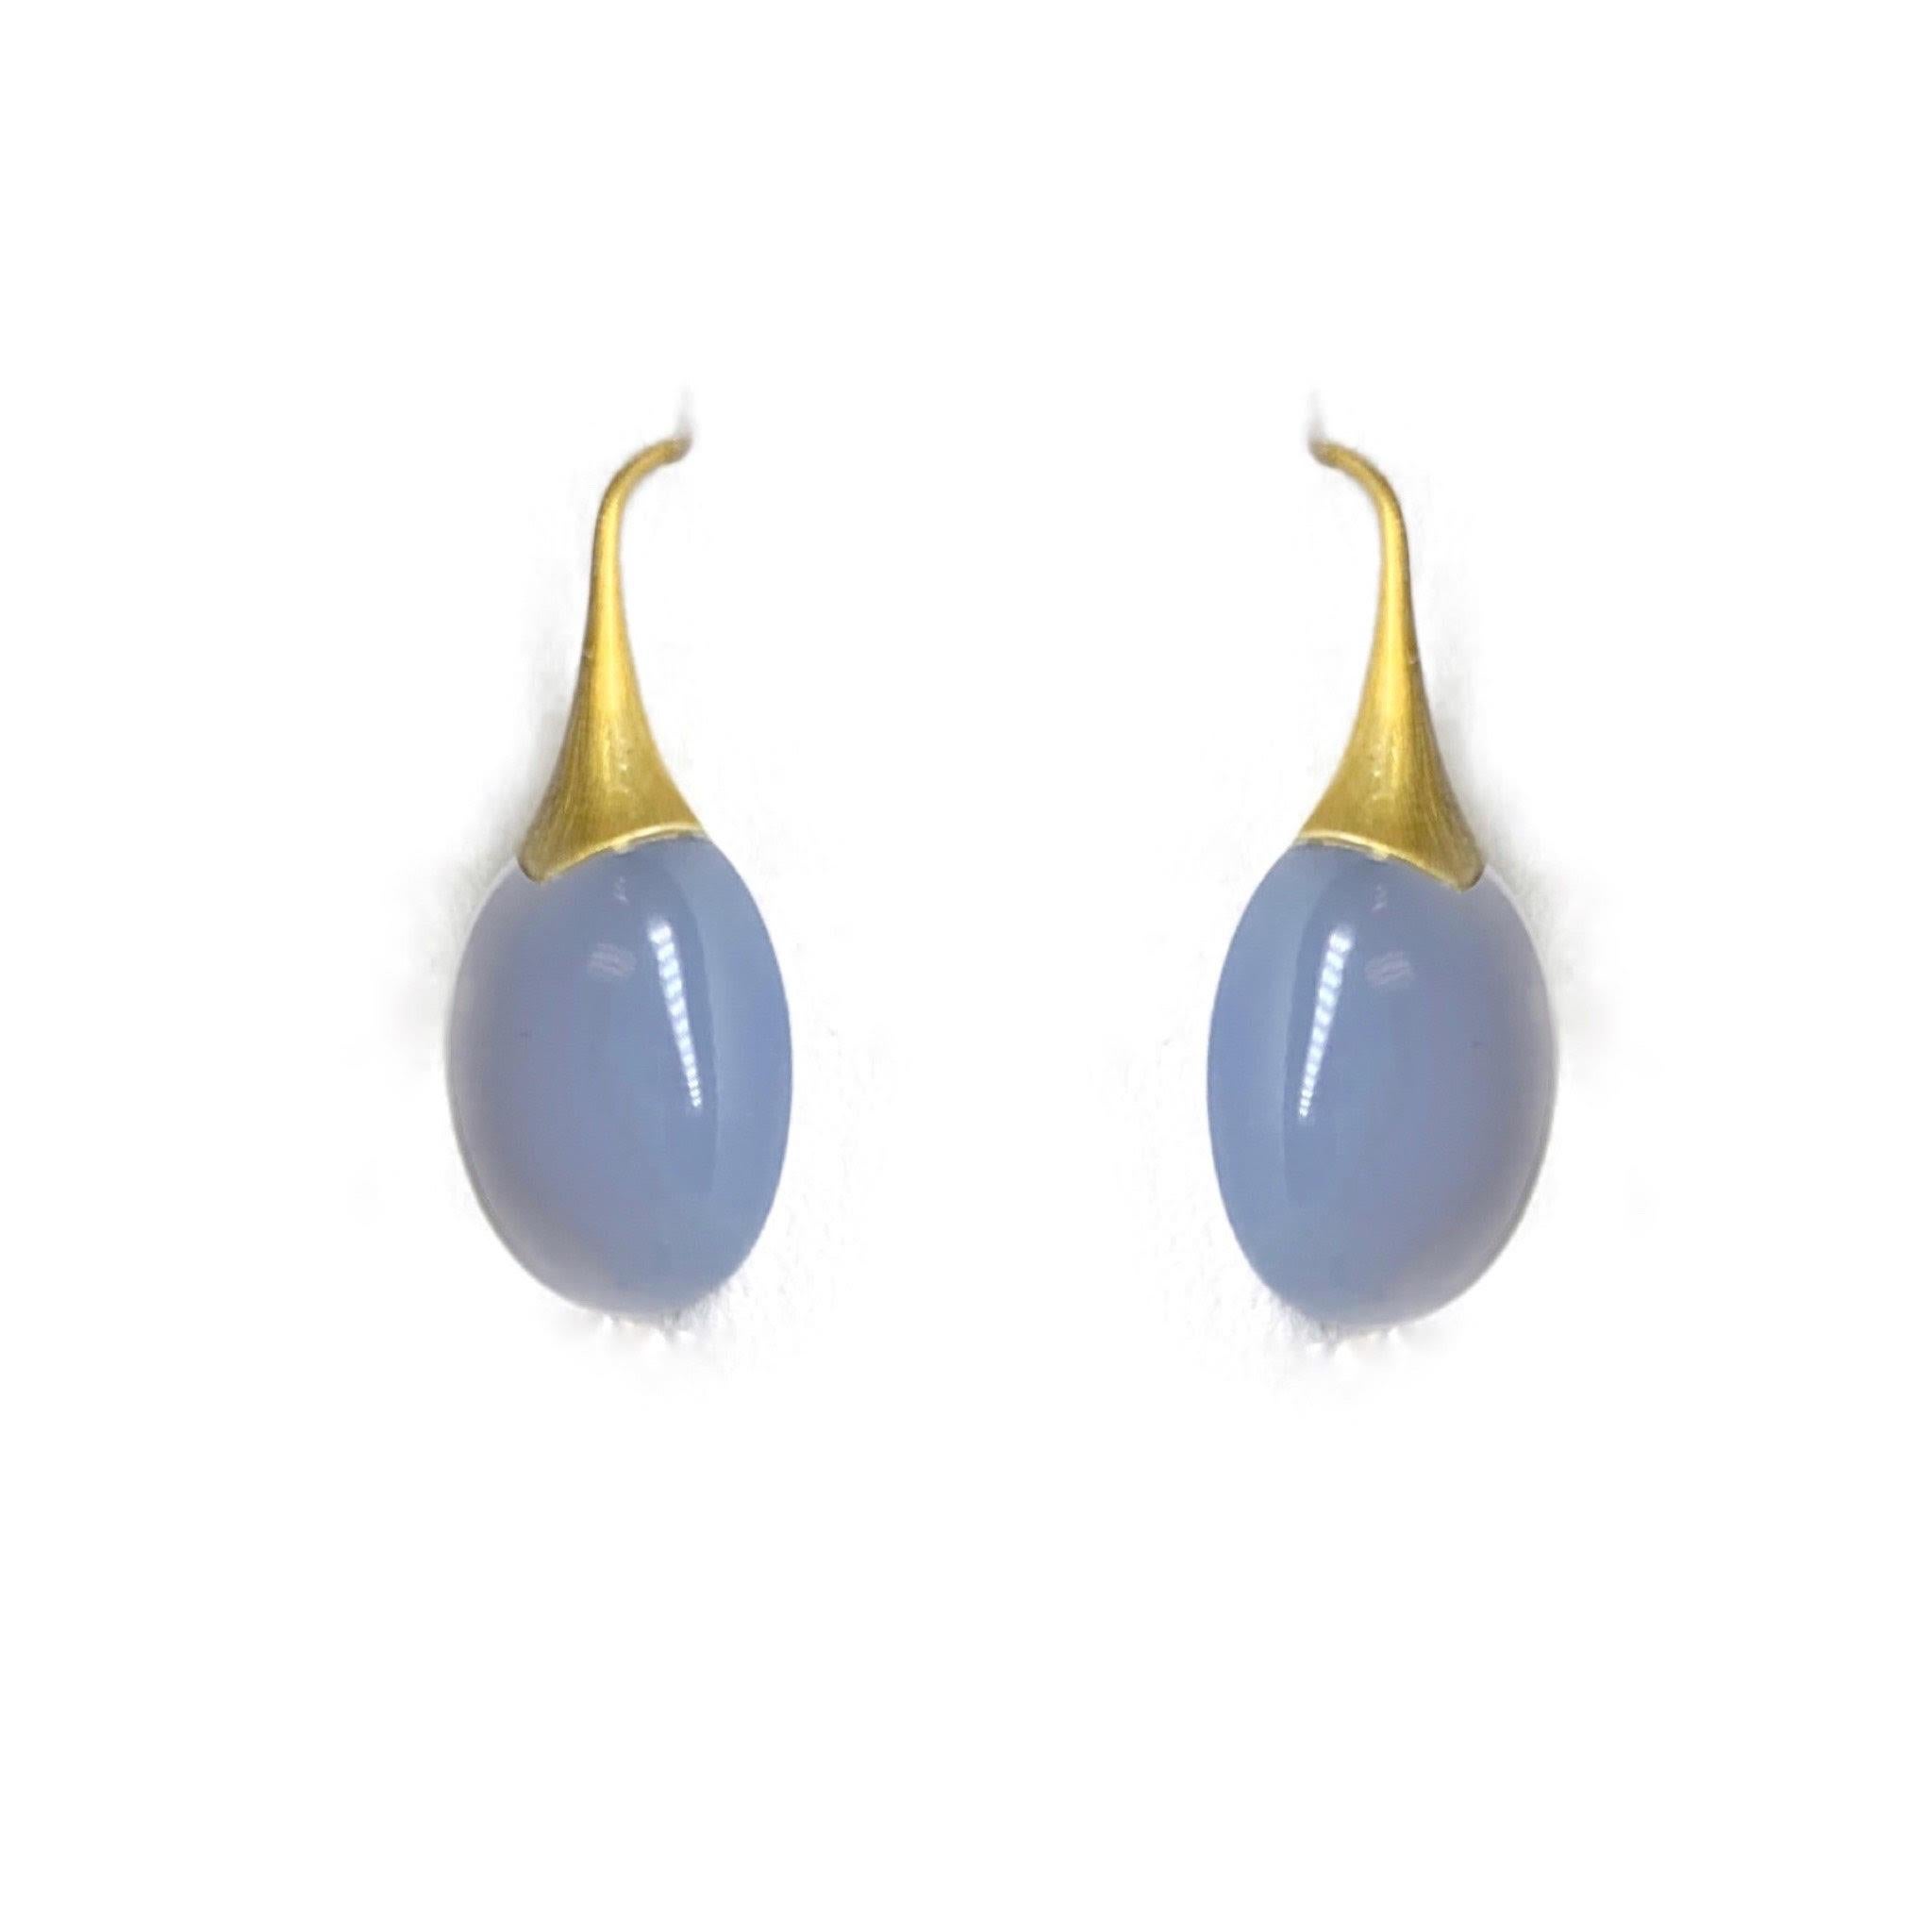 These gorgeous Chalcedony hanging earrings are great for any occasion. With a pale white color these earrings go with everything. 
A2 by Arunashi
Chalcedony on Trumpet Earrings
18 Karat Yellow Gold
Chalcedony weighing 36.75 carats 
Chalcedony is a